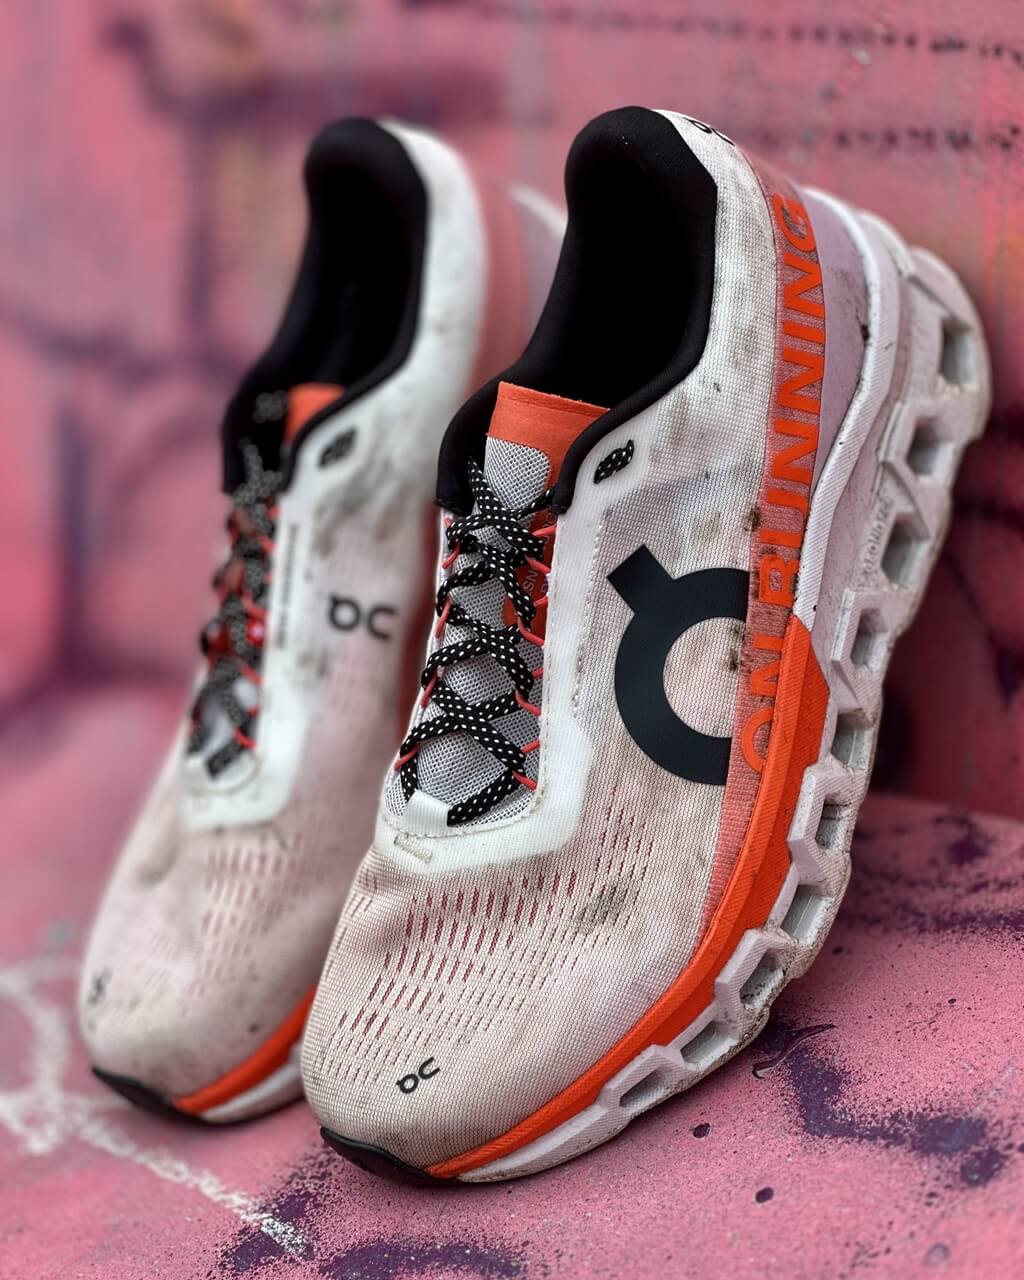 On Cloudmonster 2 running shoes in Undyed/Flame colourway propped against a pink painted wall